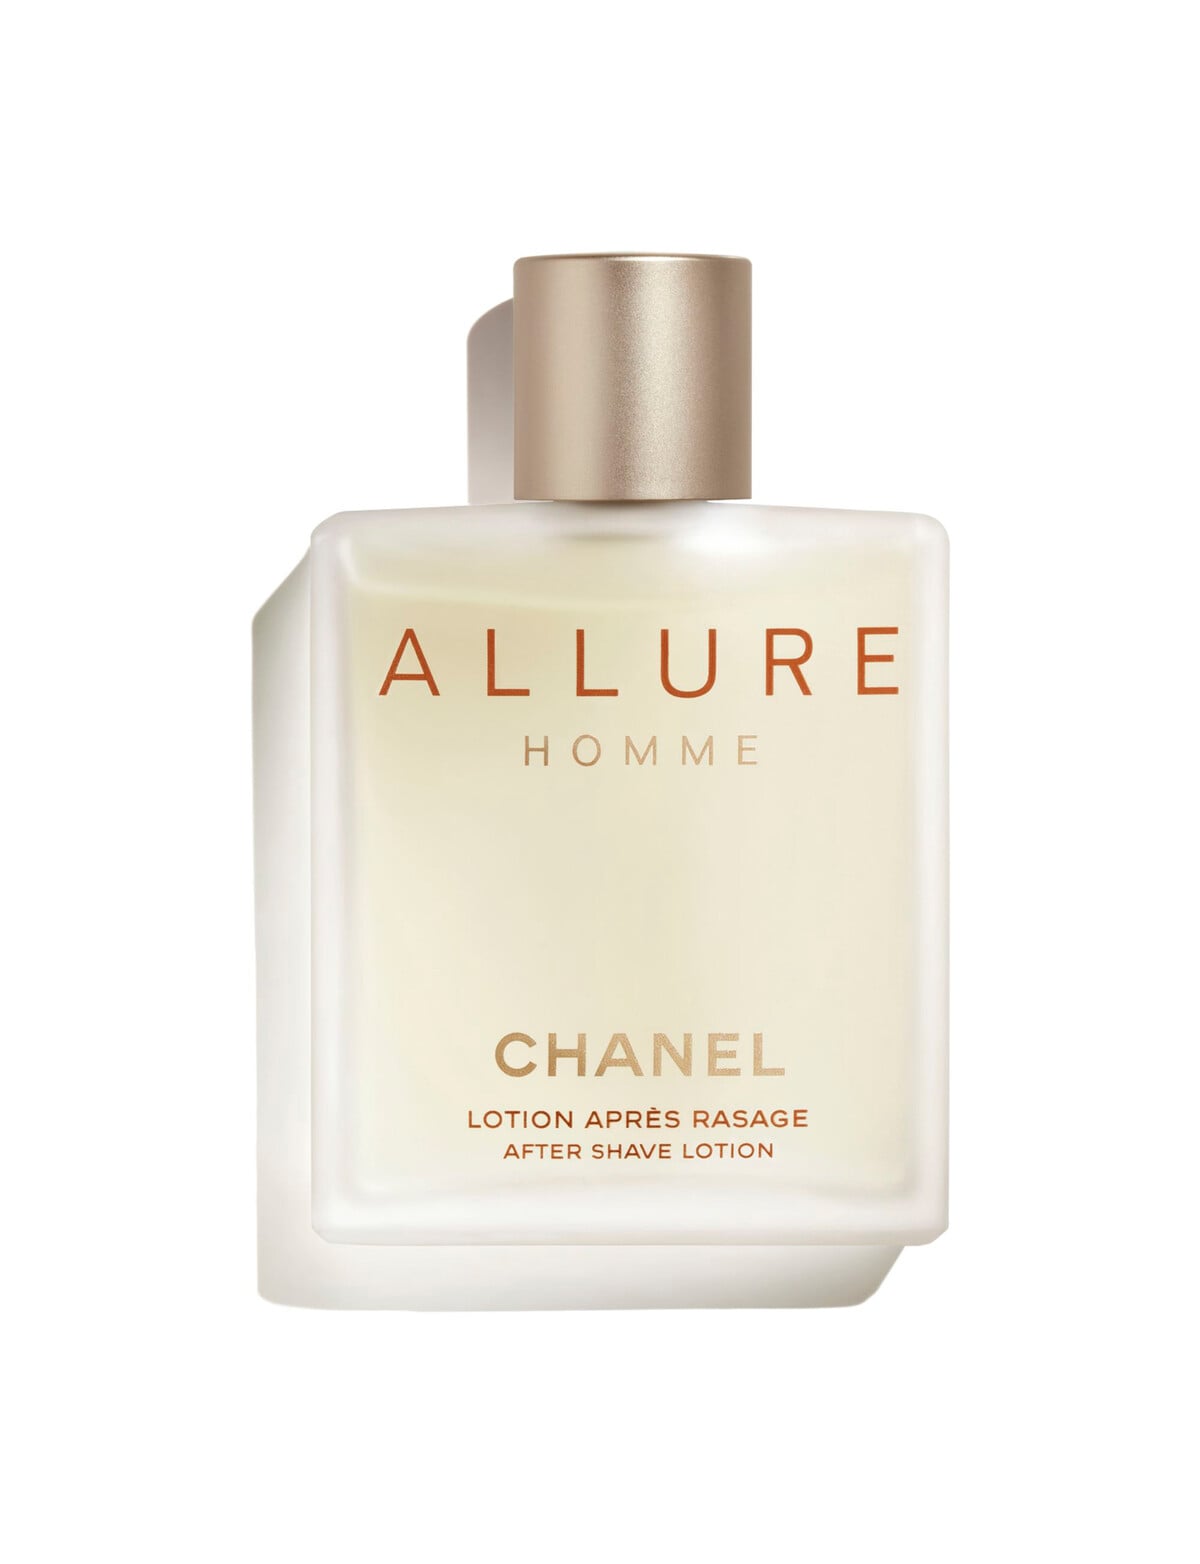 Chanel Allure Homme Sport Aftershave 100ml • Price »